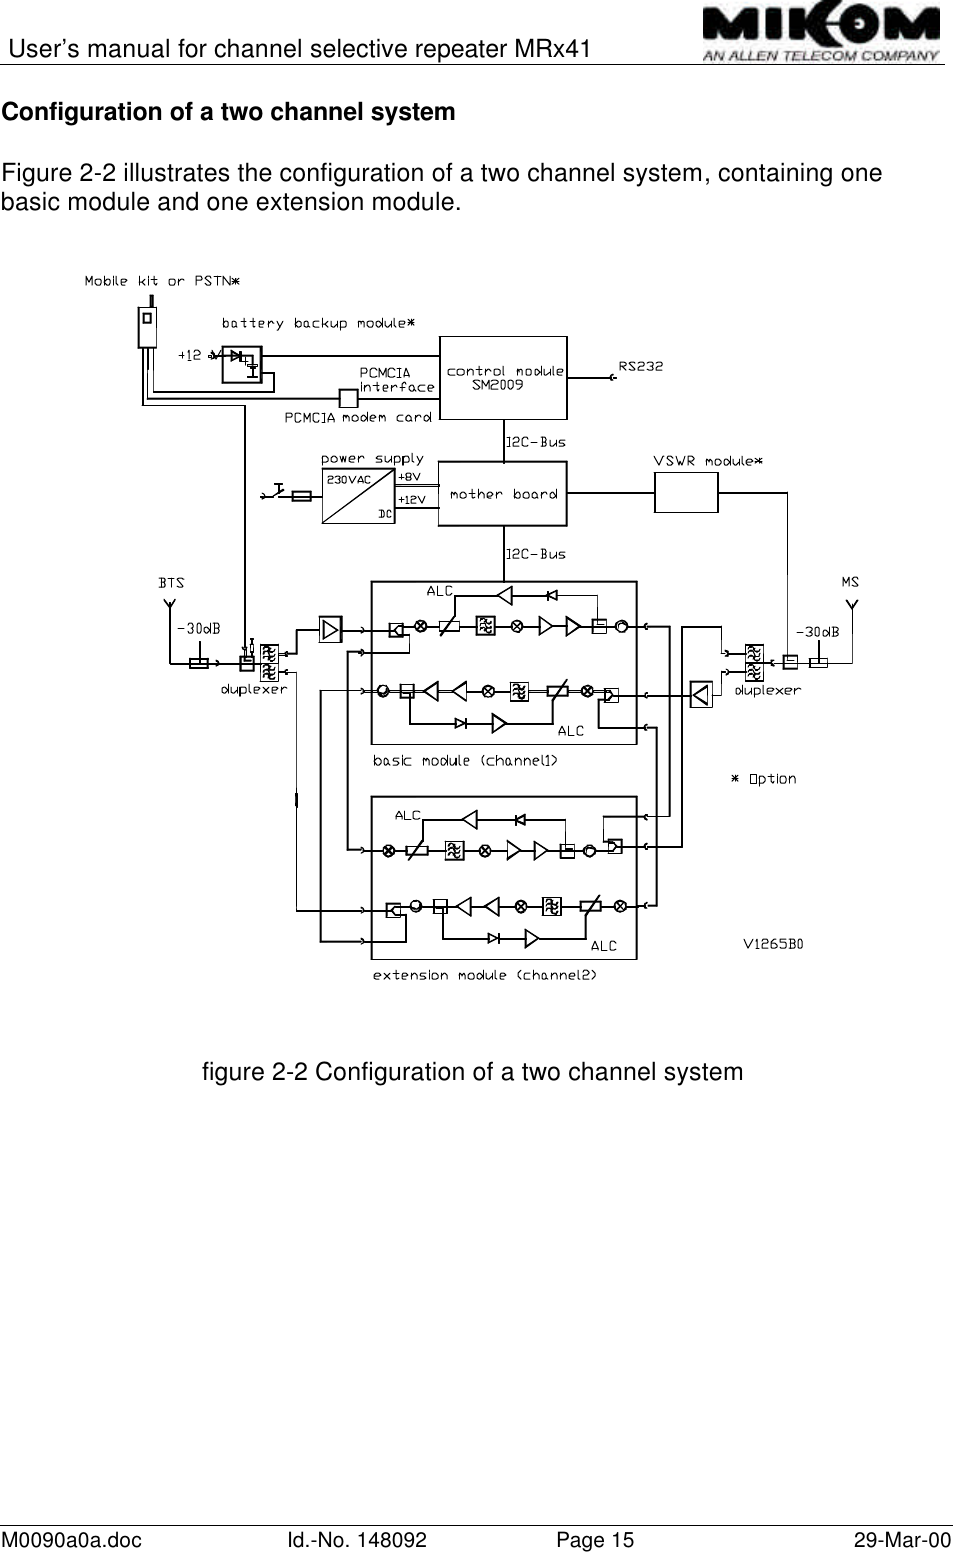 User’s manual for channel selective repeater MRx41M0090a0a.doc Id.-No. 148092 Page 15 29-Mar-00Configuration of a two channel systemFigure 2-2 illustrates the configuration of a two channel system, containing onebasic module and one extension module.figure 2-2 Configuration of a two channel system